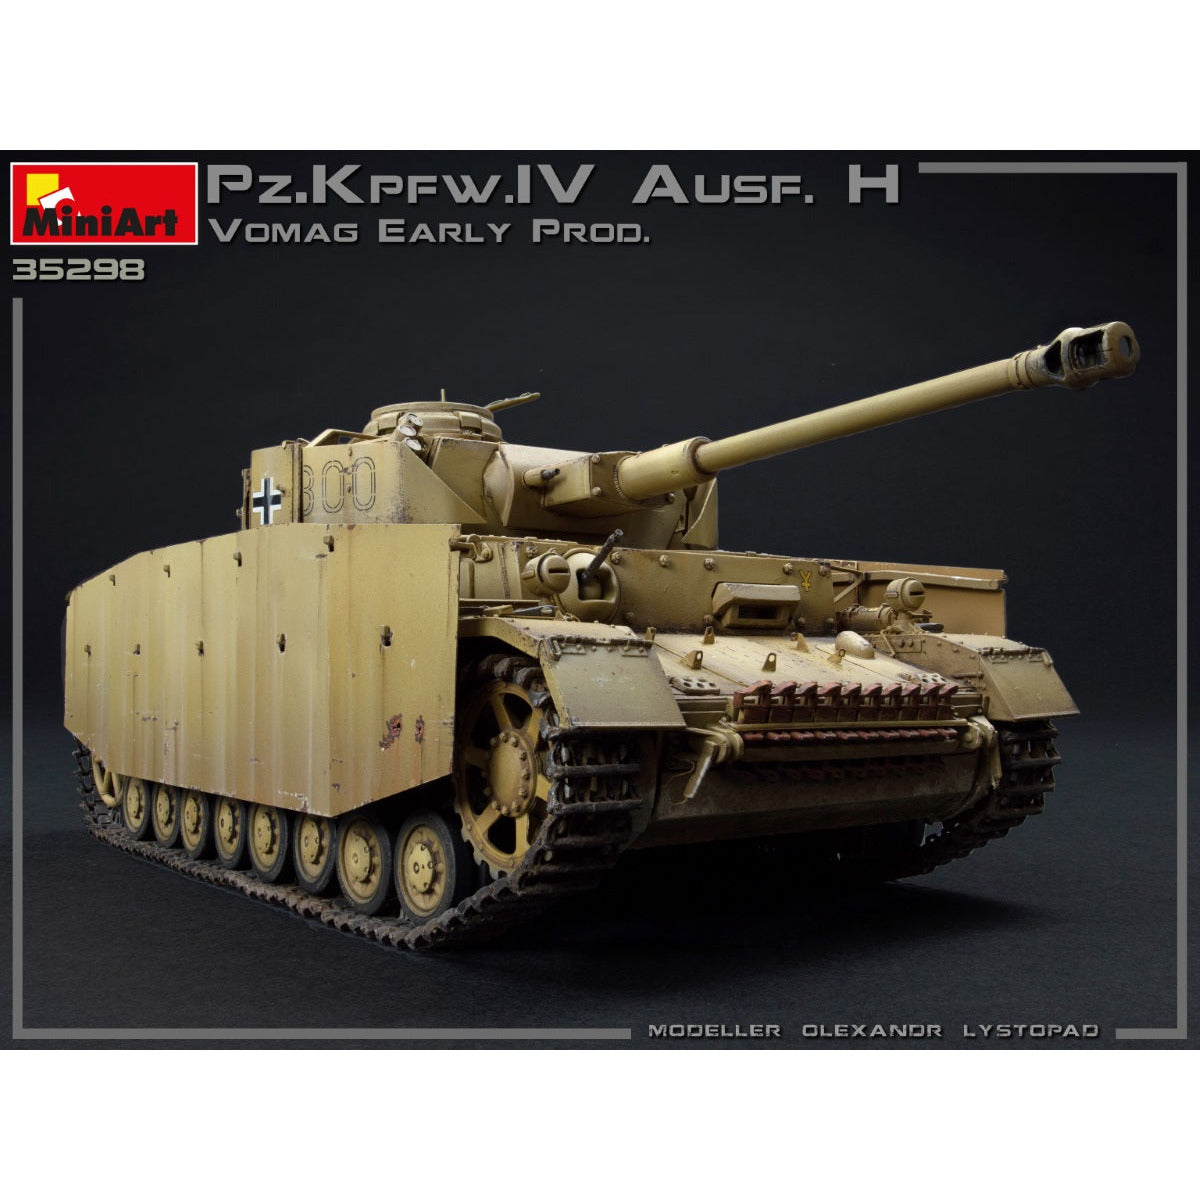 MINIART 1/35 Pz.Kpfw.IV Ausf. H Vomag. Early Prod. May 1943. Interior Kit